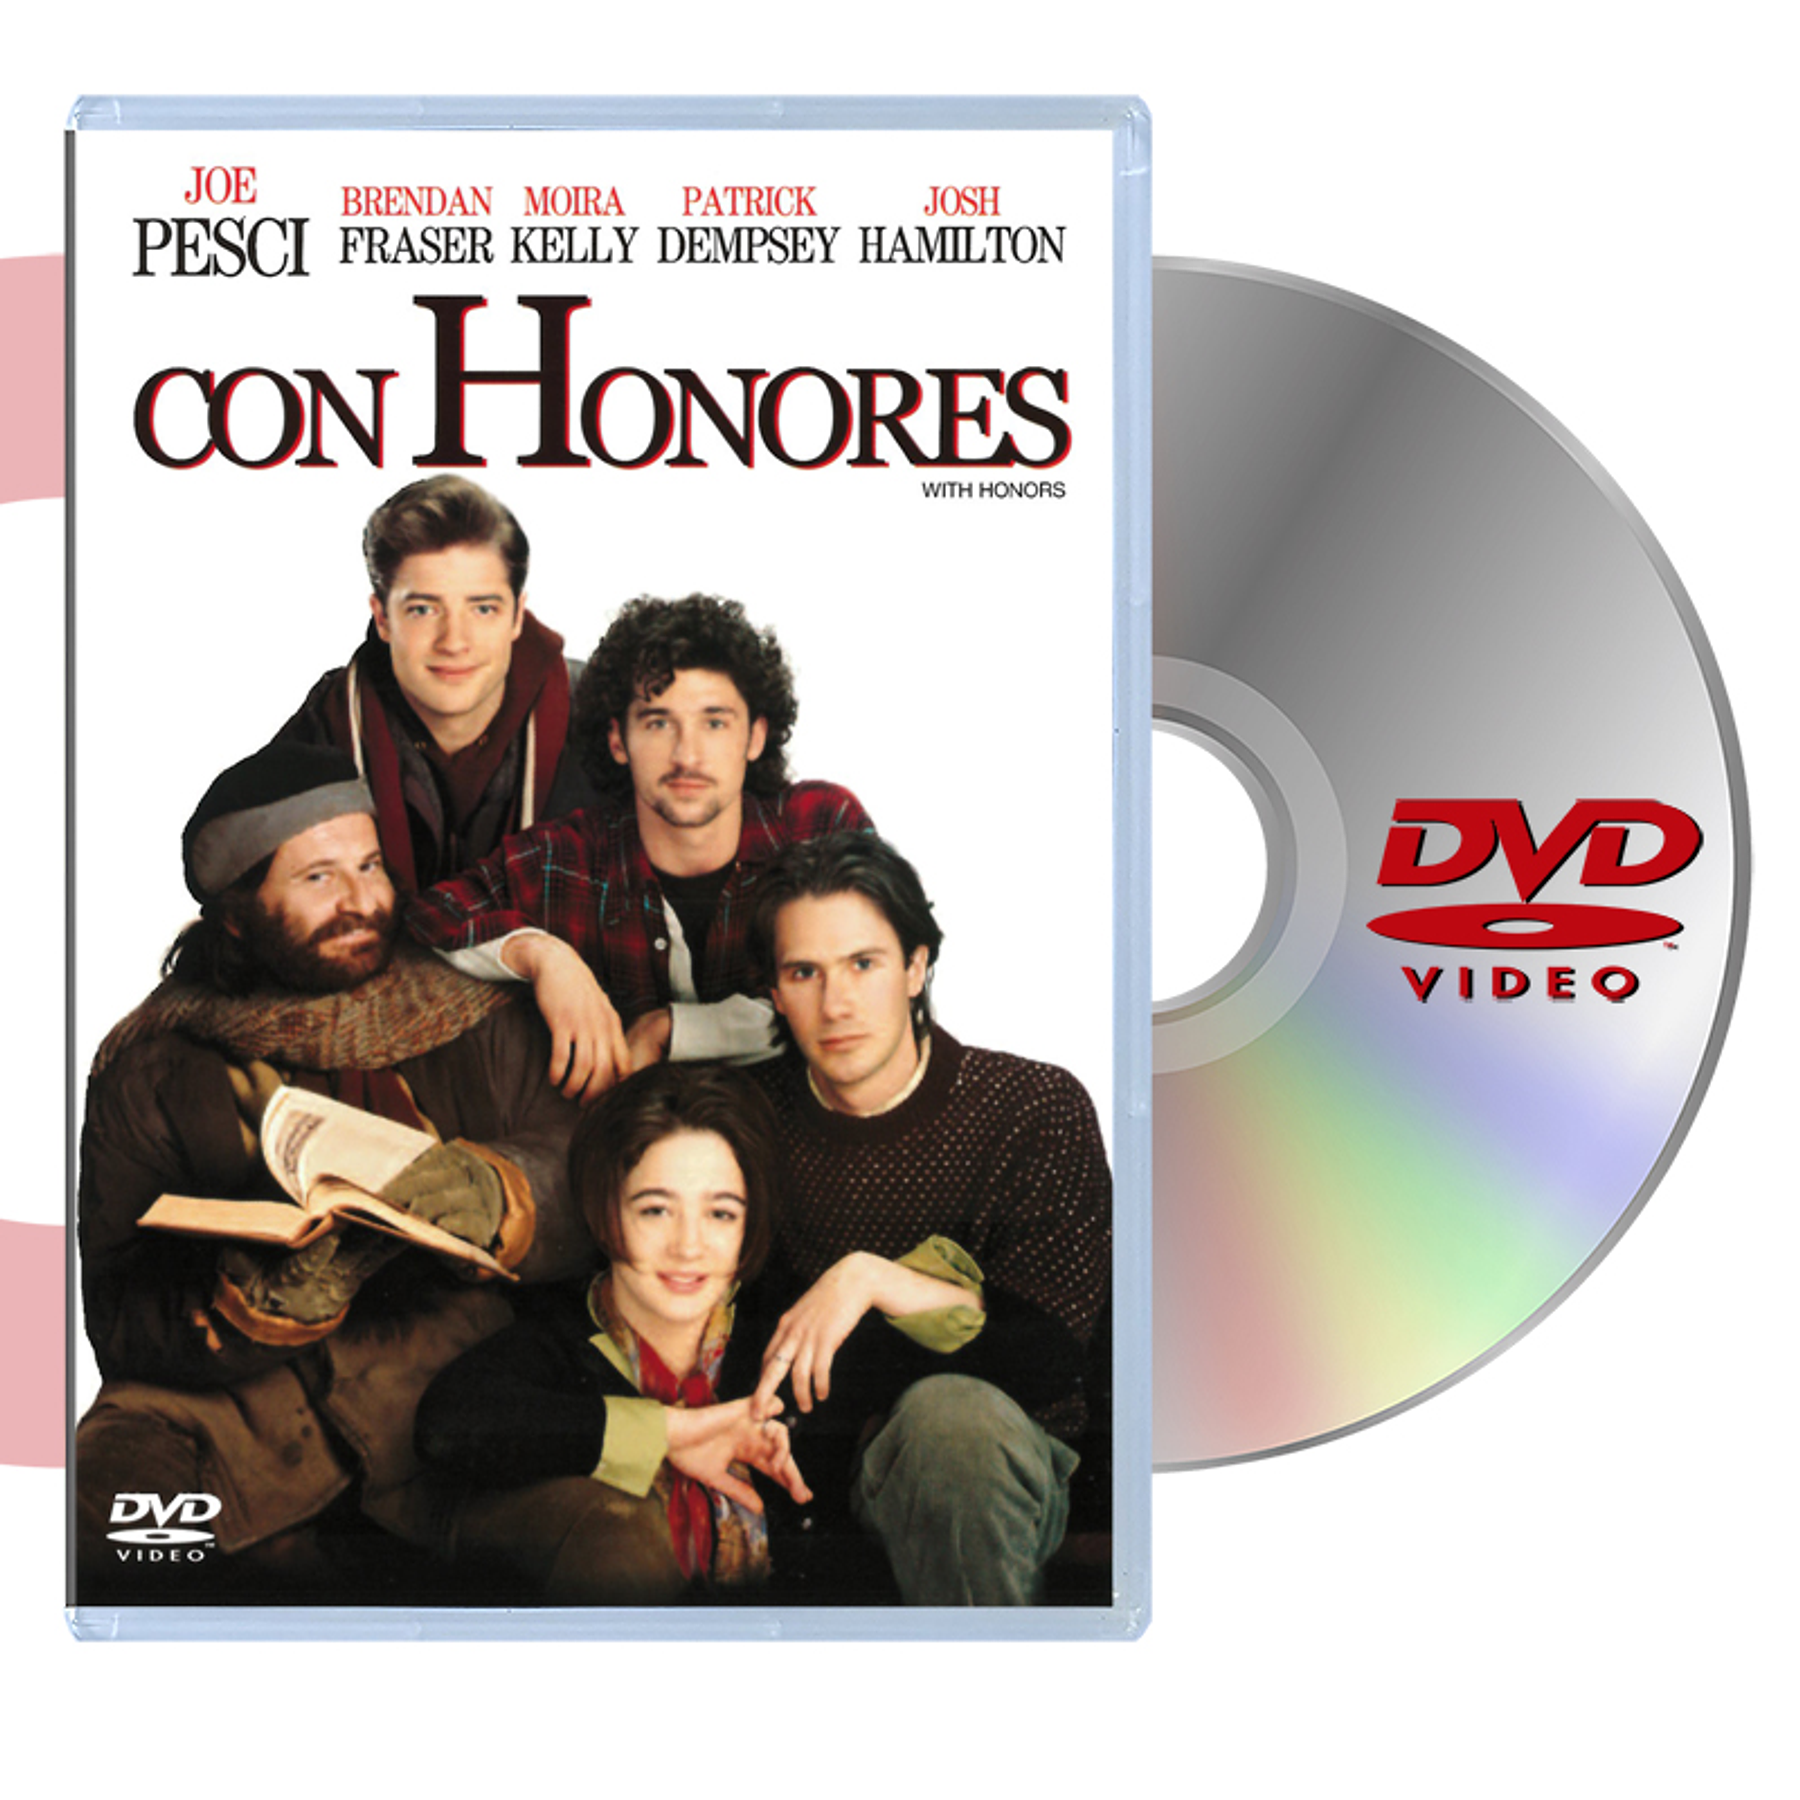 DVD CON HONORES